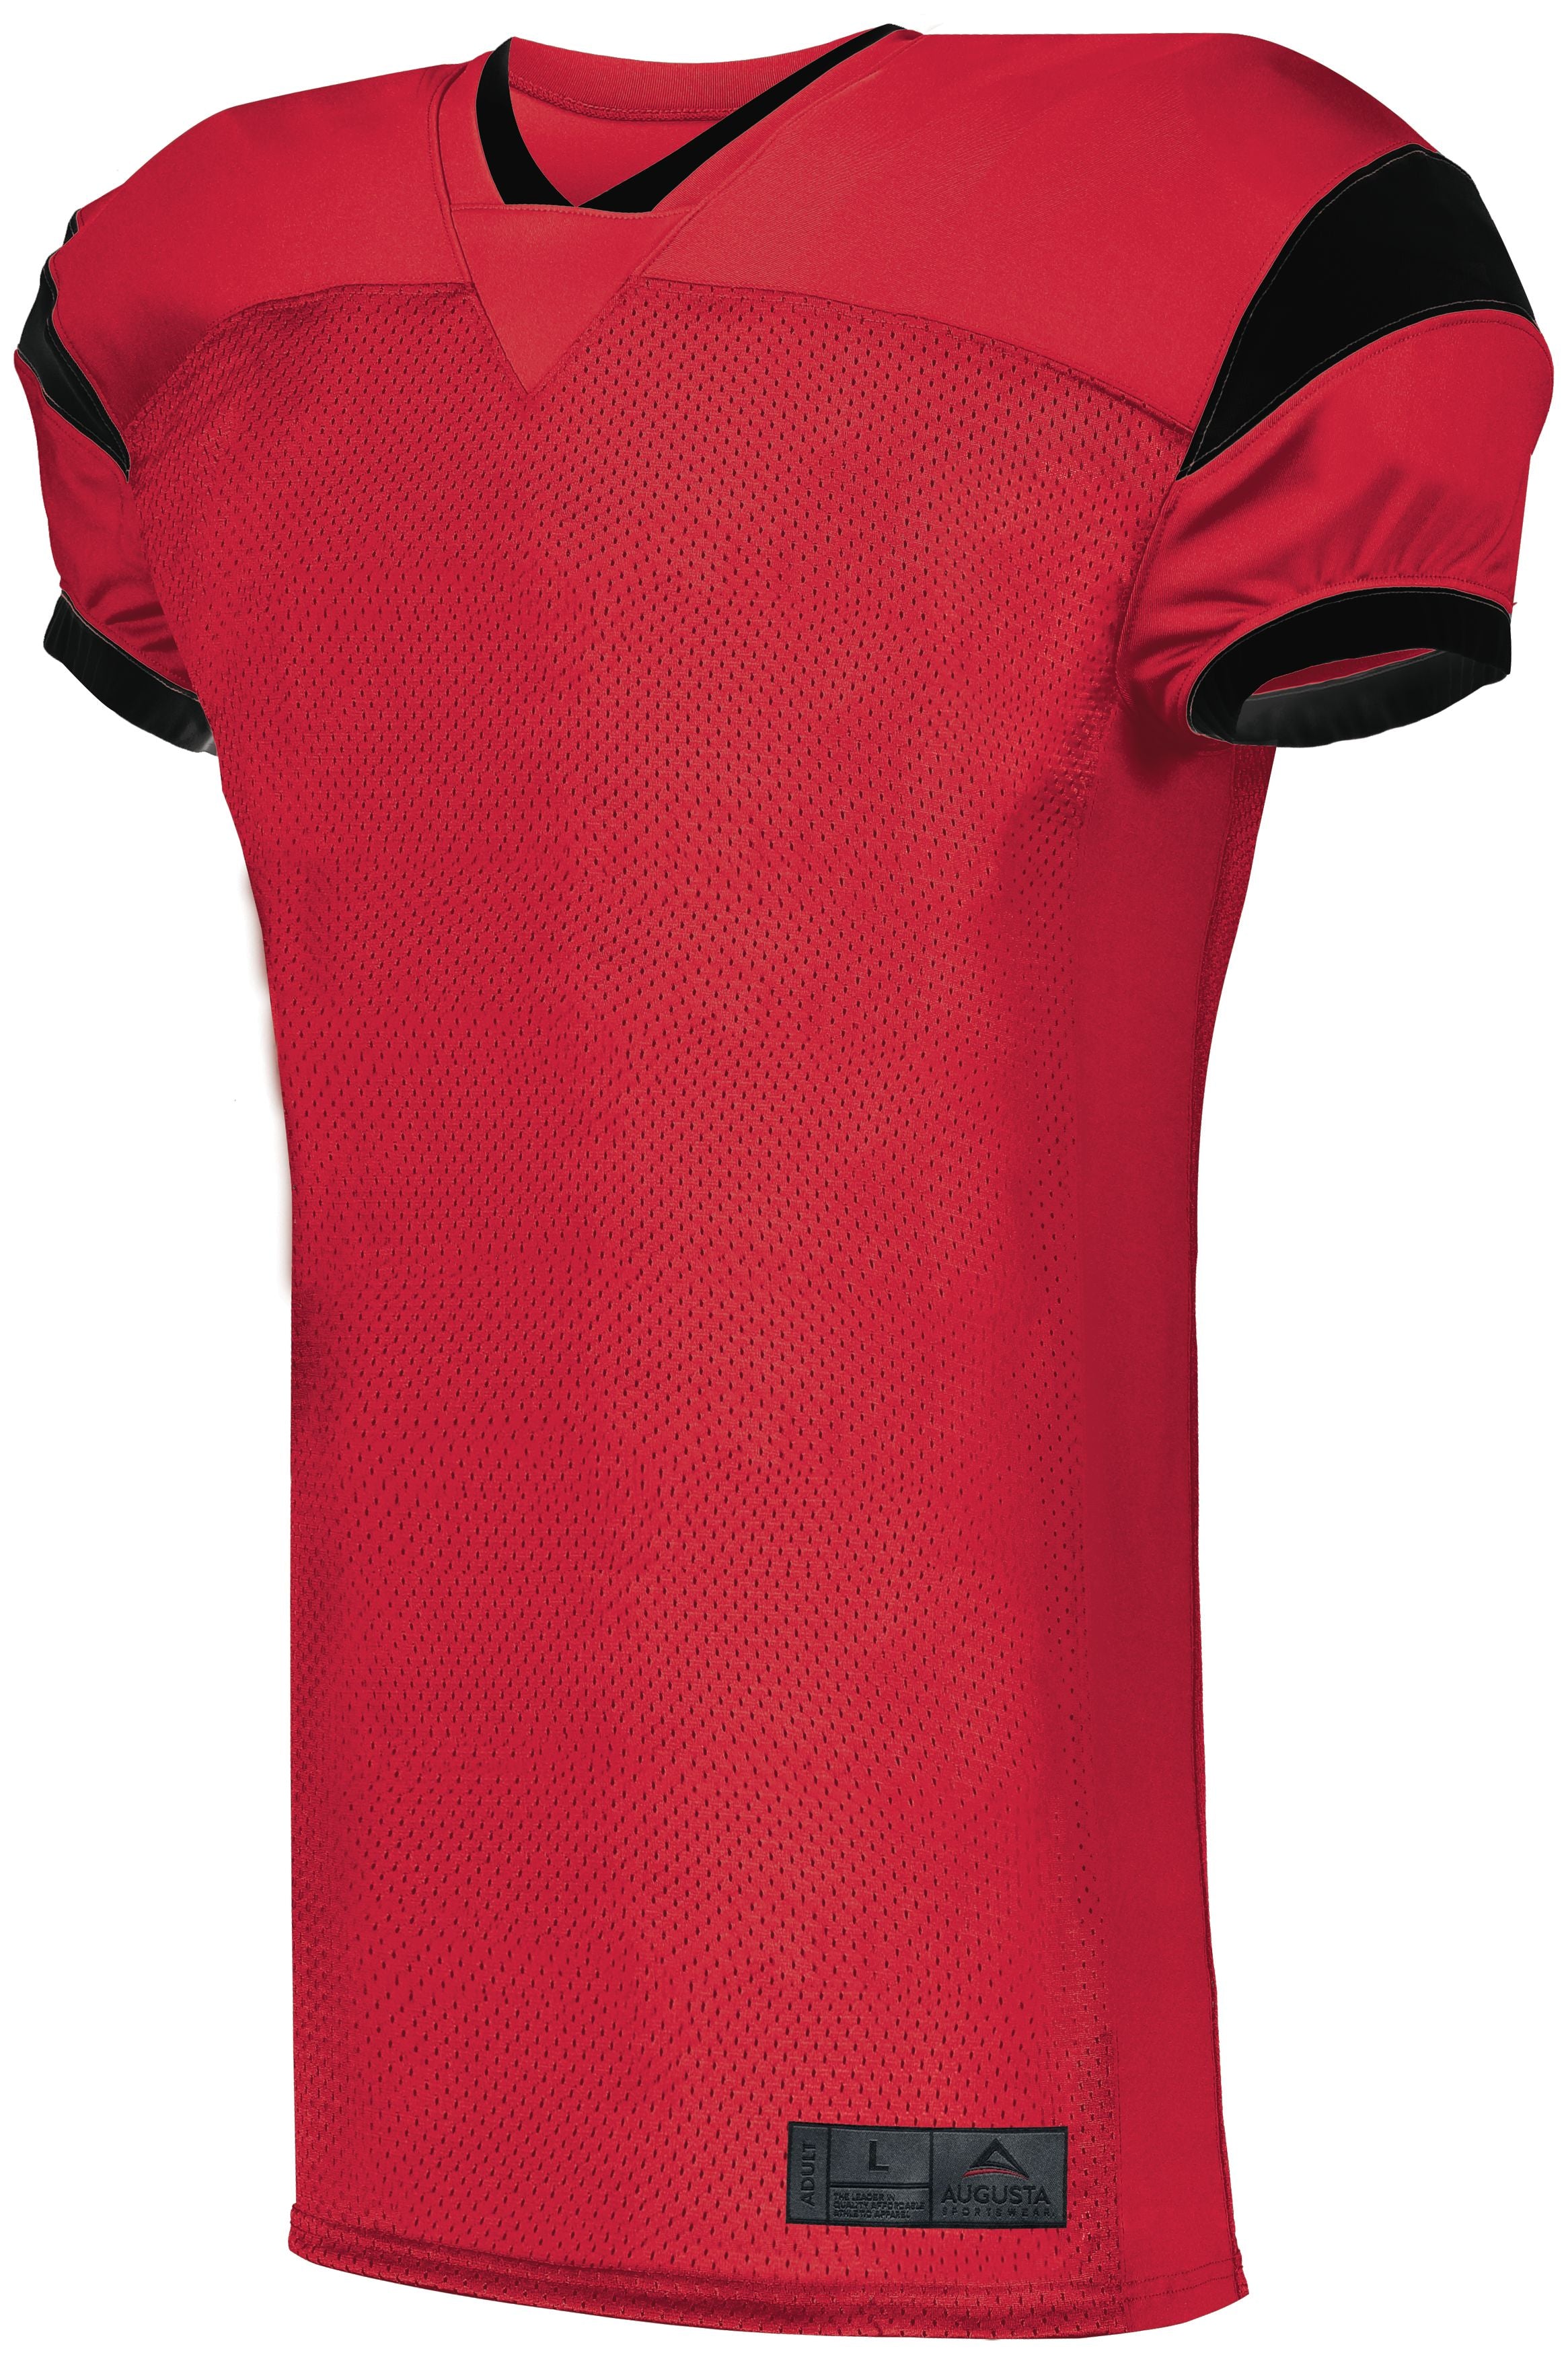 Augusta Sportswear Youth Slant Football Jersey in Red/Black  -Part of the Youth, Youth-Jersey, Augusta-Products, Football, Shirts, All-Sports, All-Sports-1 product lines at KanaleyCreations.com